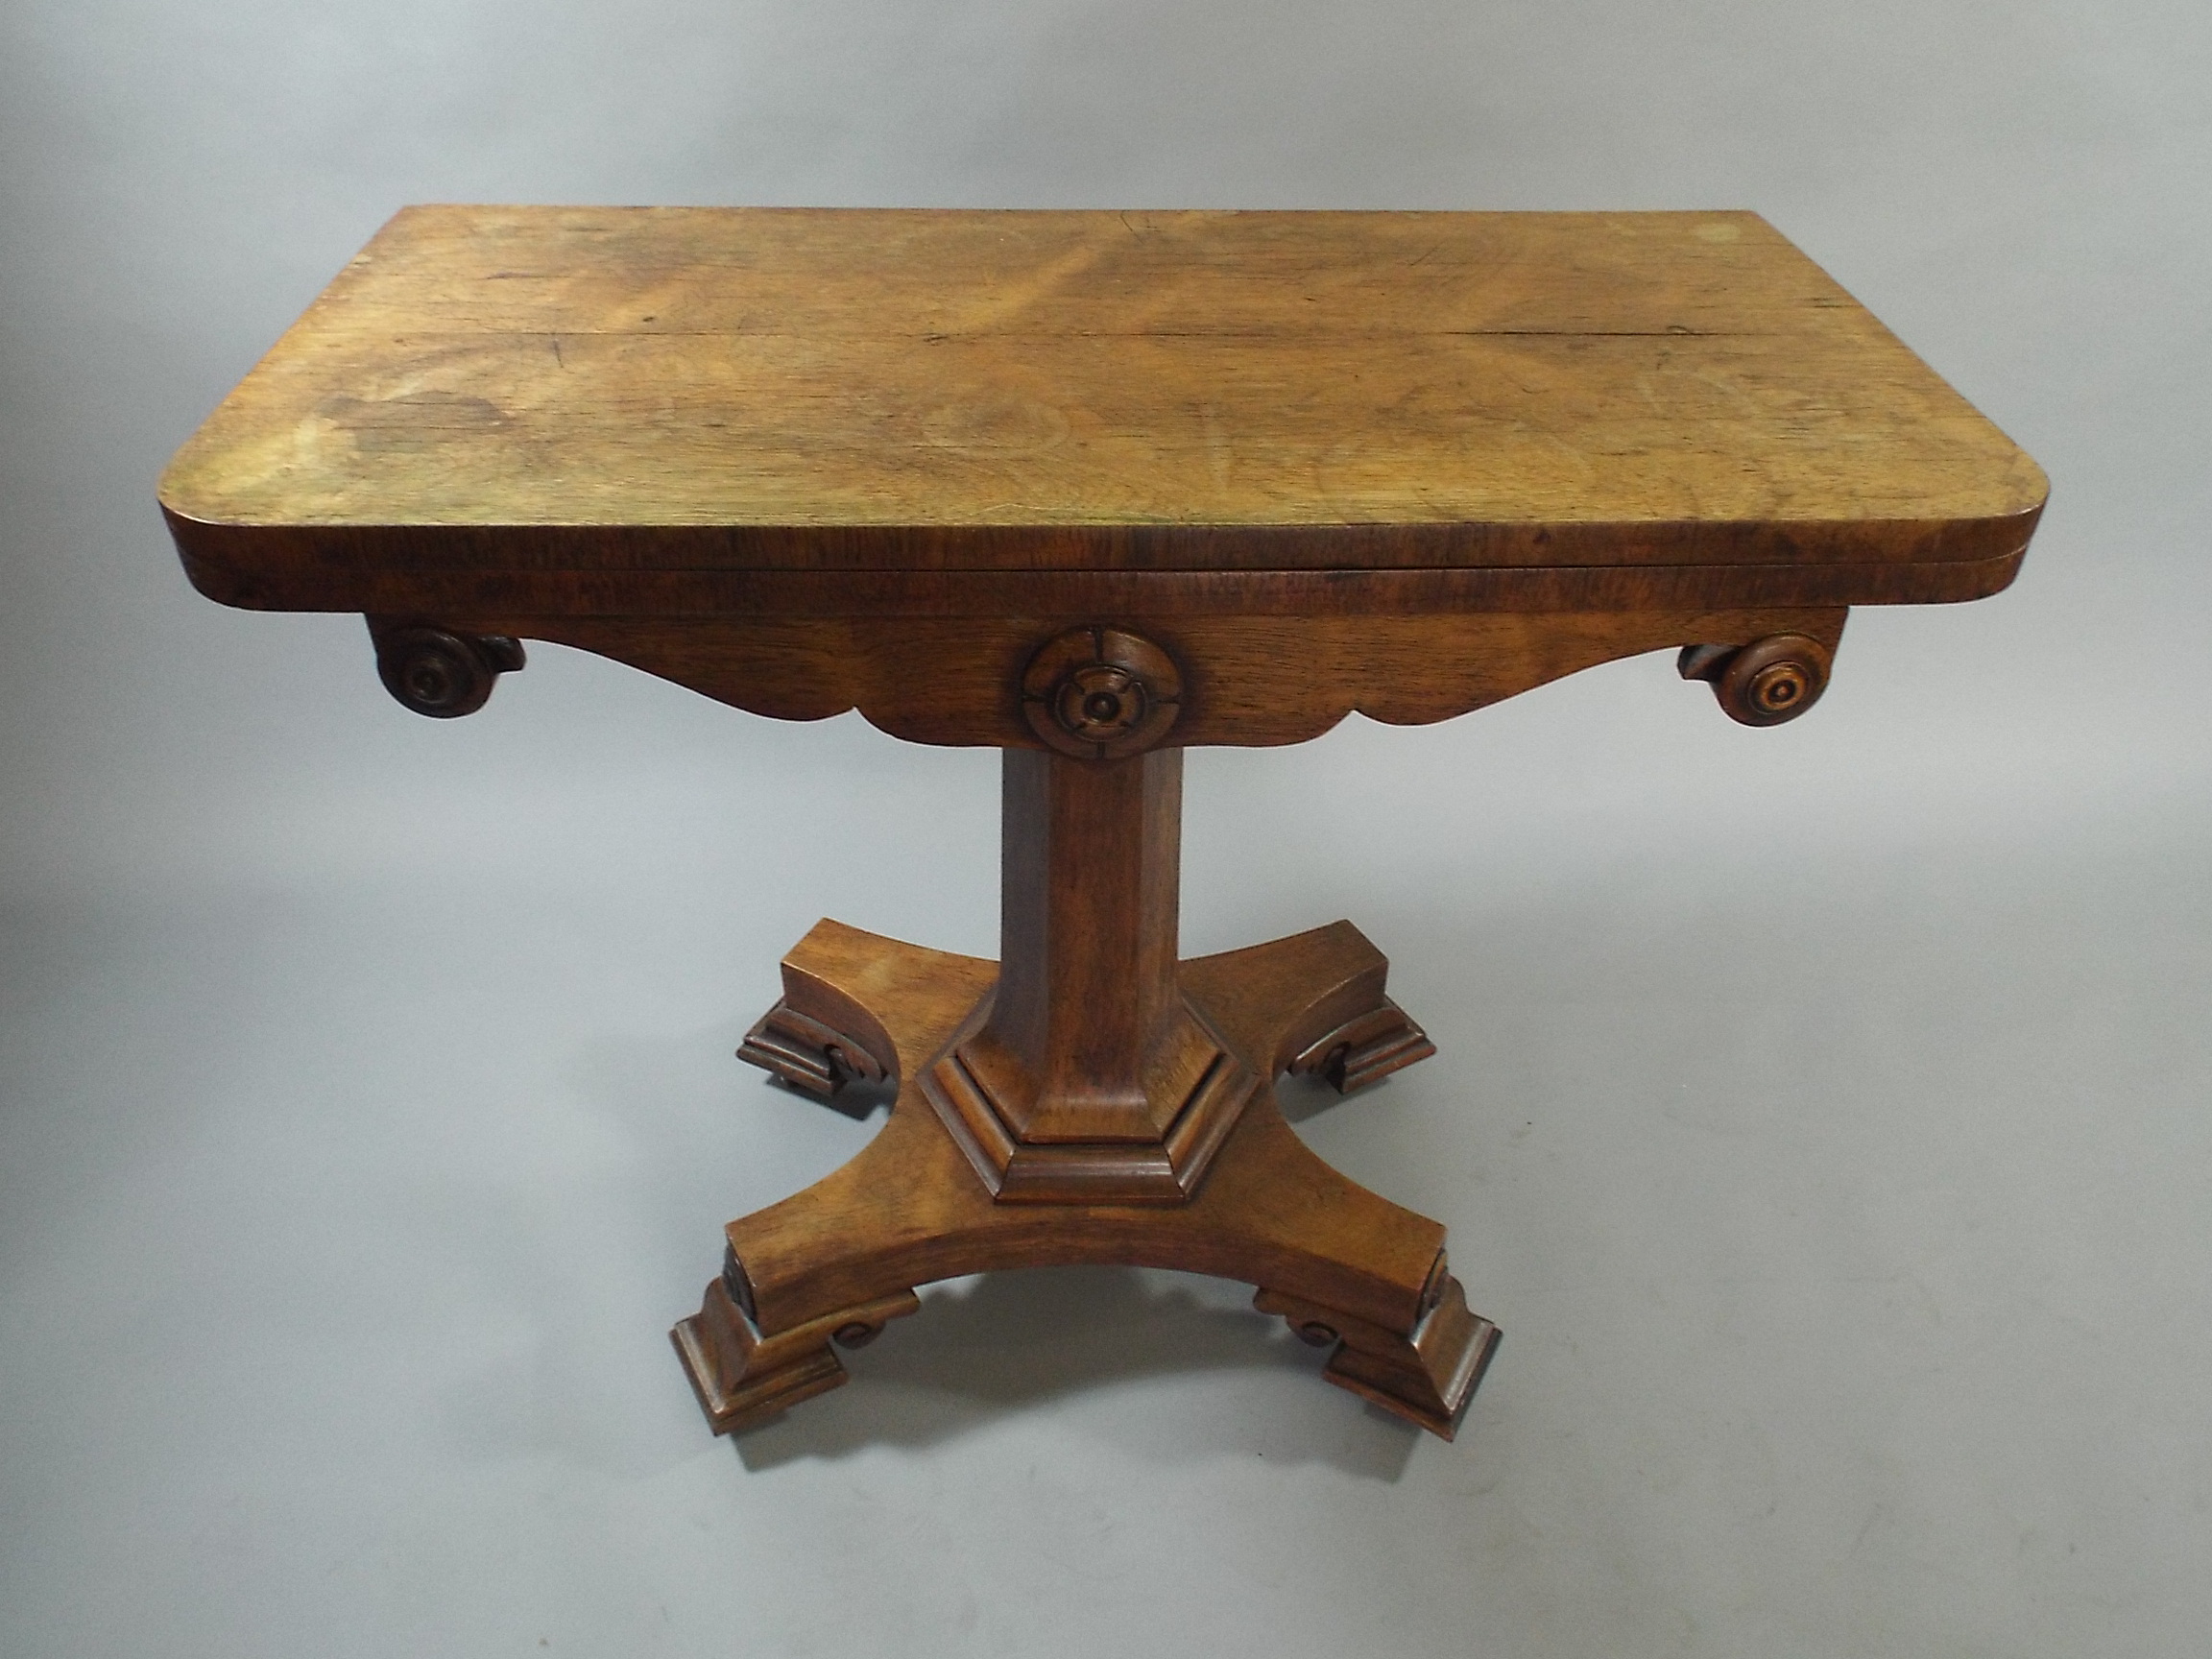 A Mid 19th Century Rosewood Lift and Twist Tea Table on Hexagonal Support.